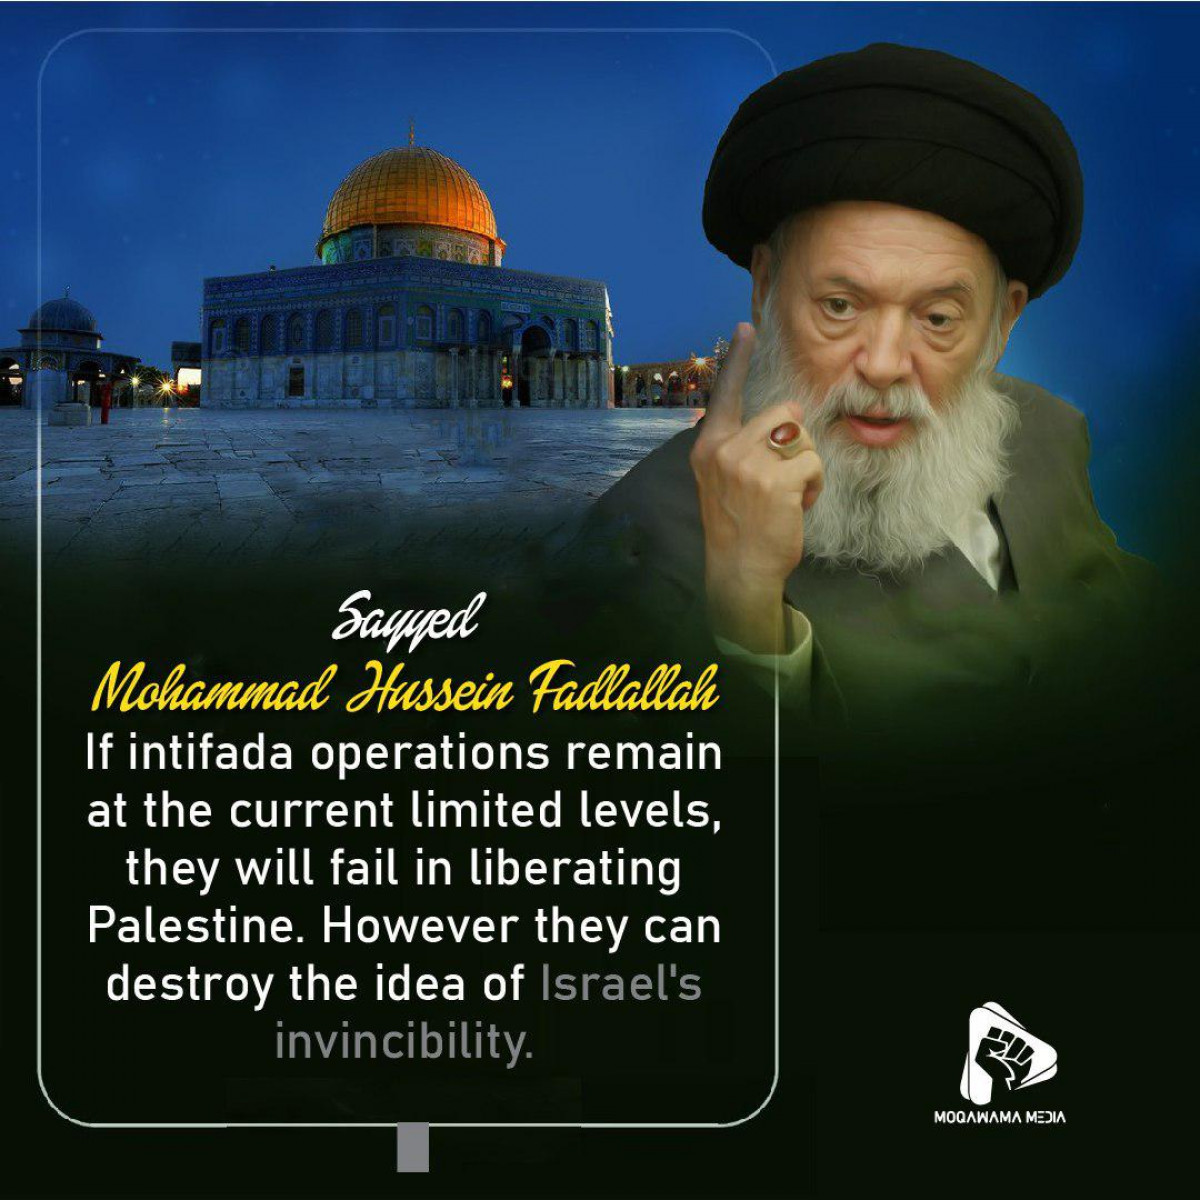 If intifada operations remain at the current limited levels, they will fail in liberating Palestine